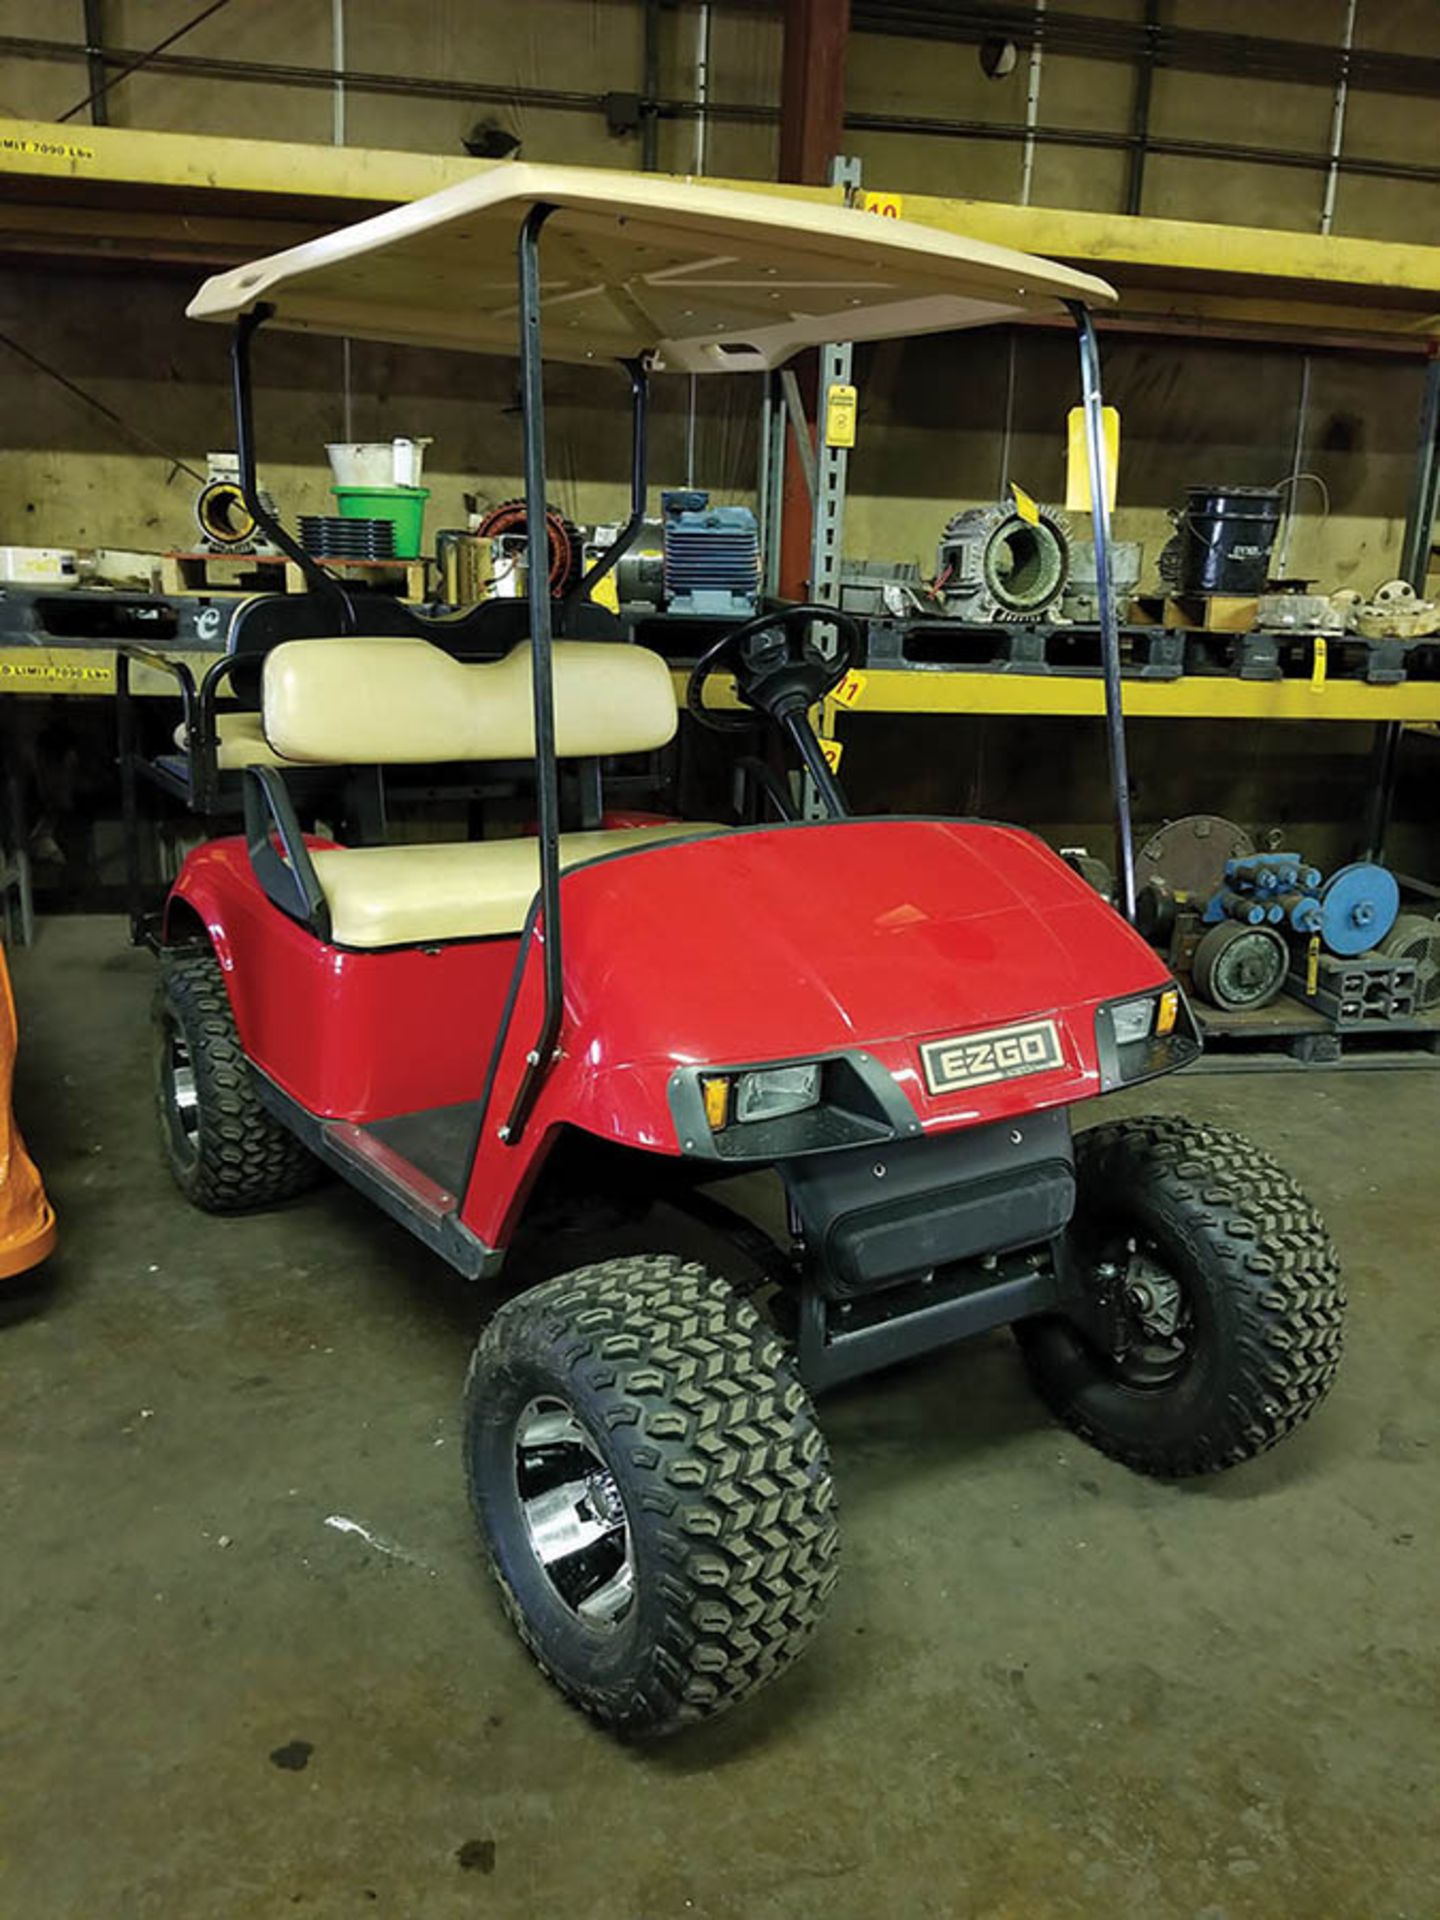 EZ-GO ELECTRIC GOLF CART; 48V WITH CHARGER, 4 PASSENGER, FOLD DOWN SEAT, LIFT KIT, HEADLIGHTS, BRAKE - Image 5 of 10